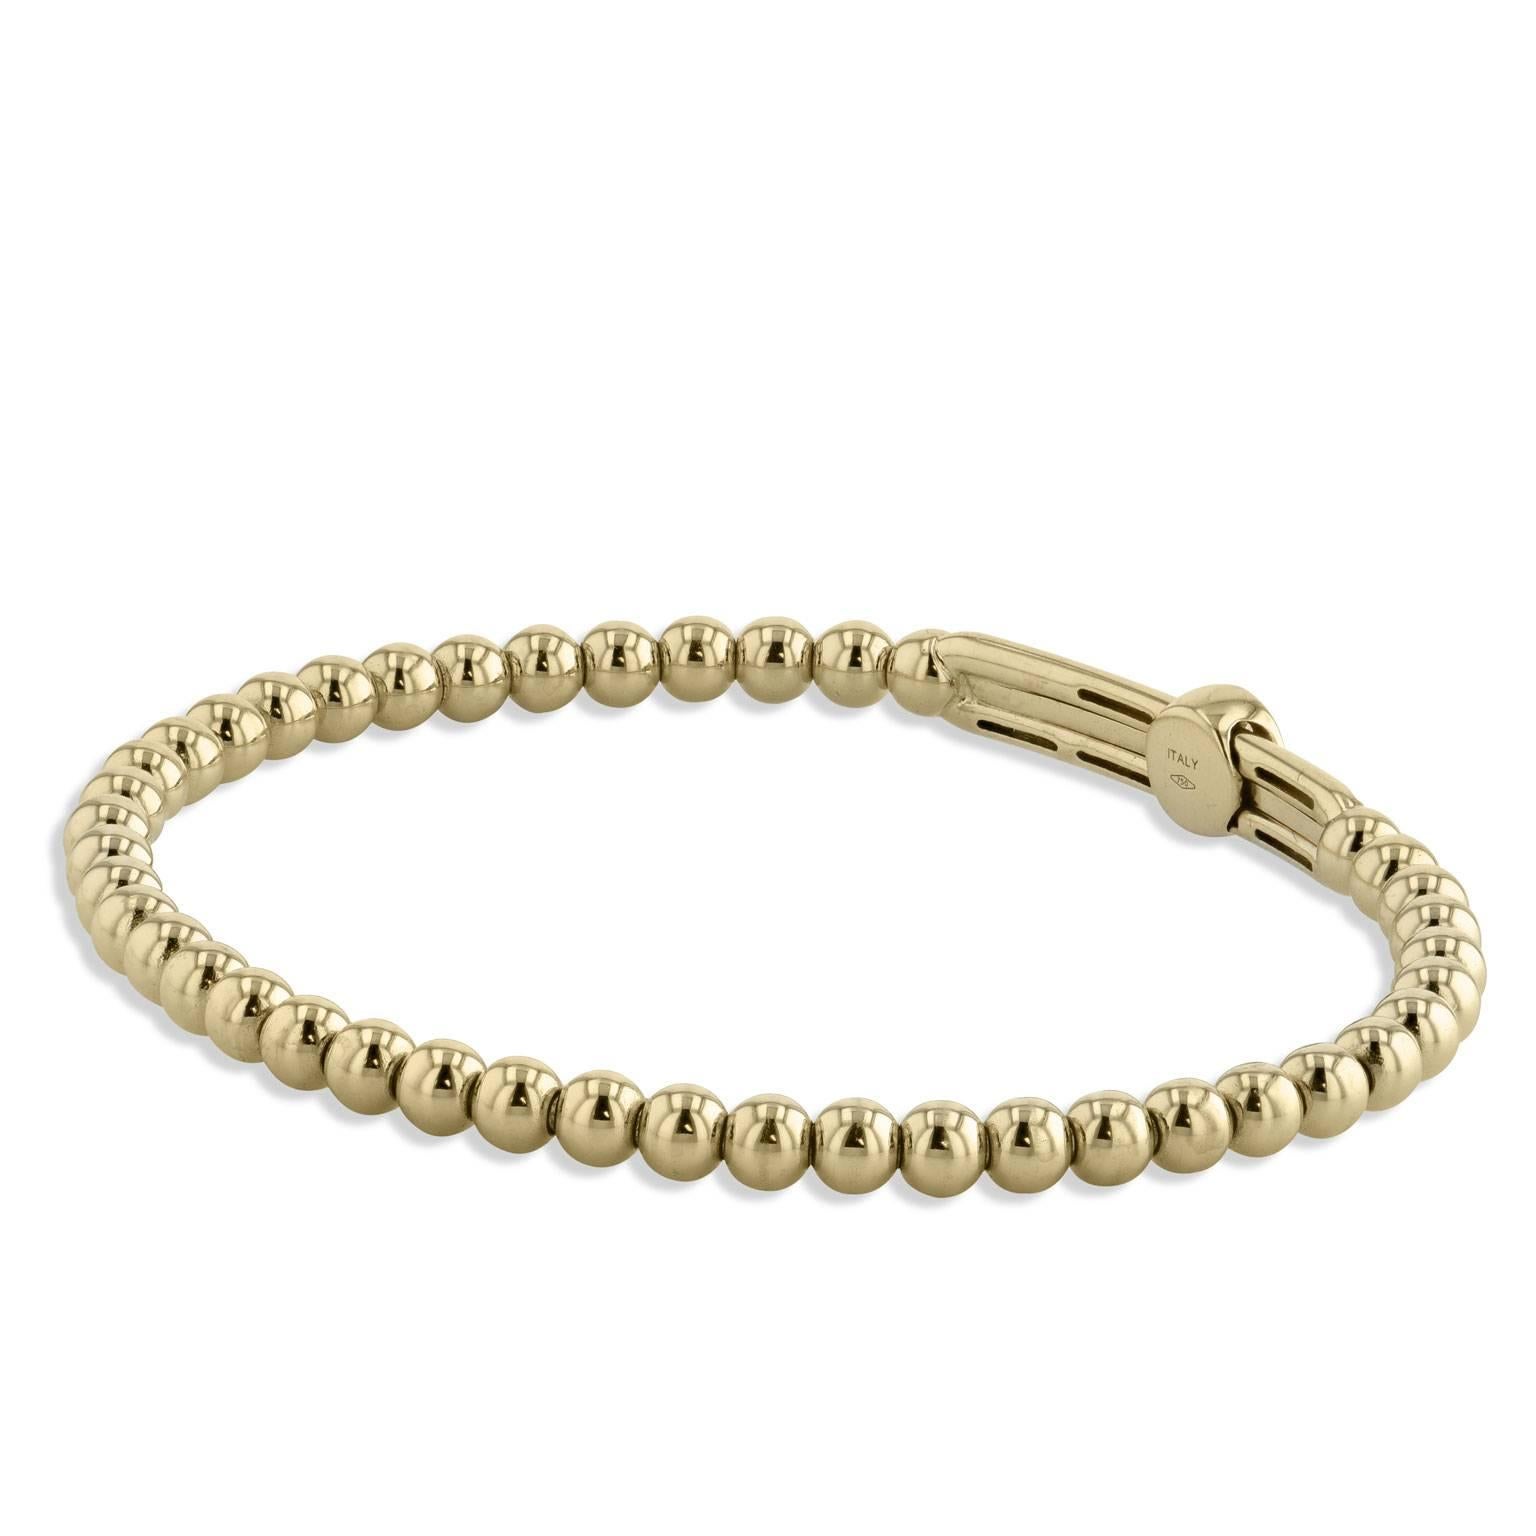 0.22 carat of pave-set diamonds are affixed within a bar on a disc slide in this 18 karat yellow gold beaded bracelet.